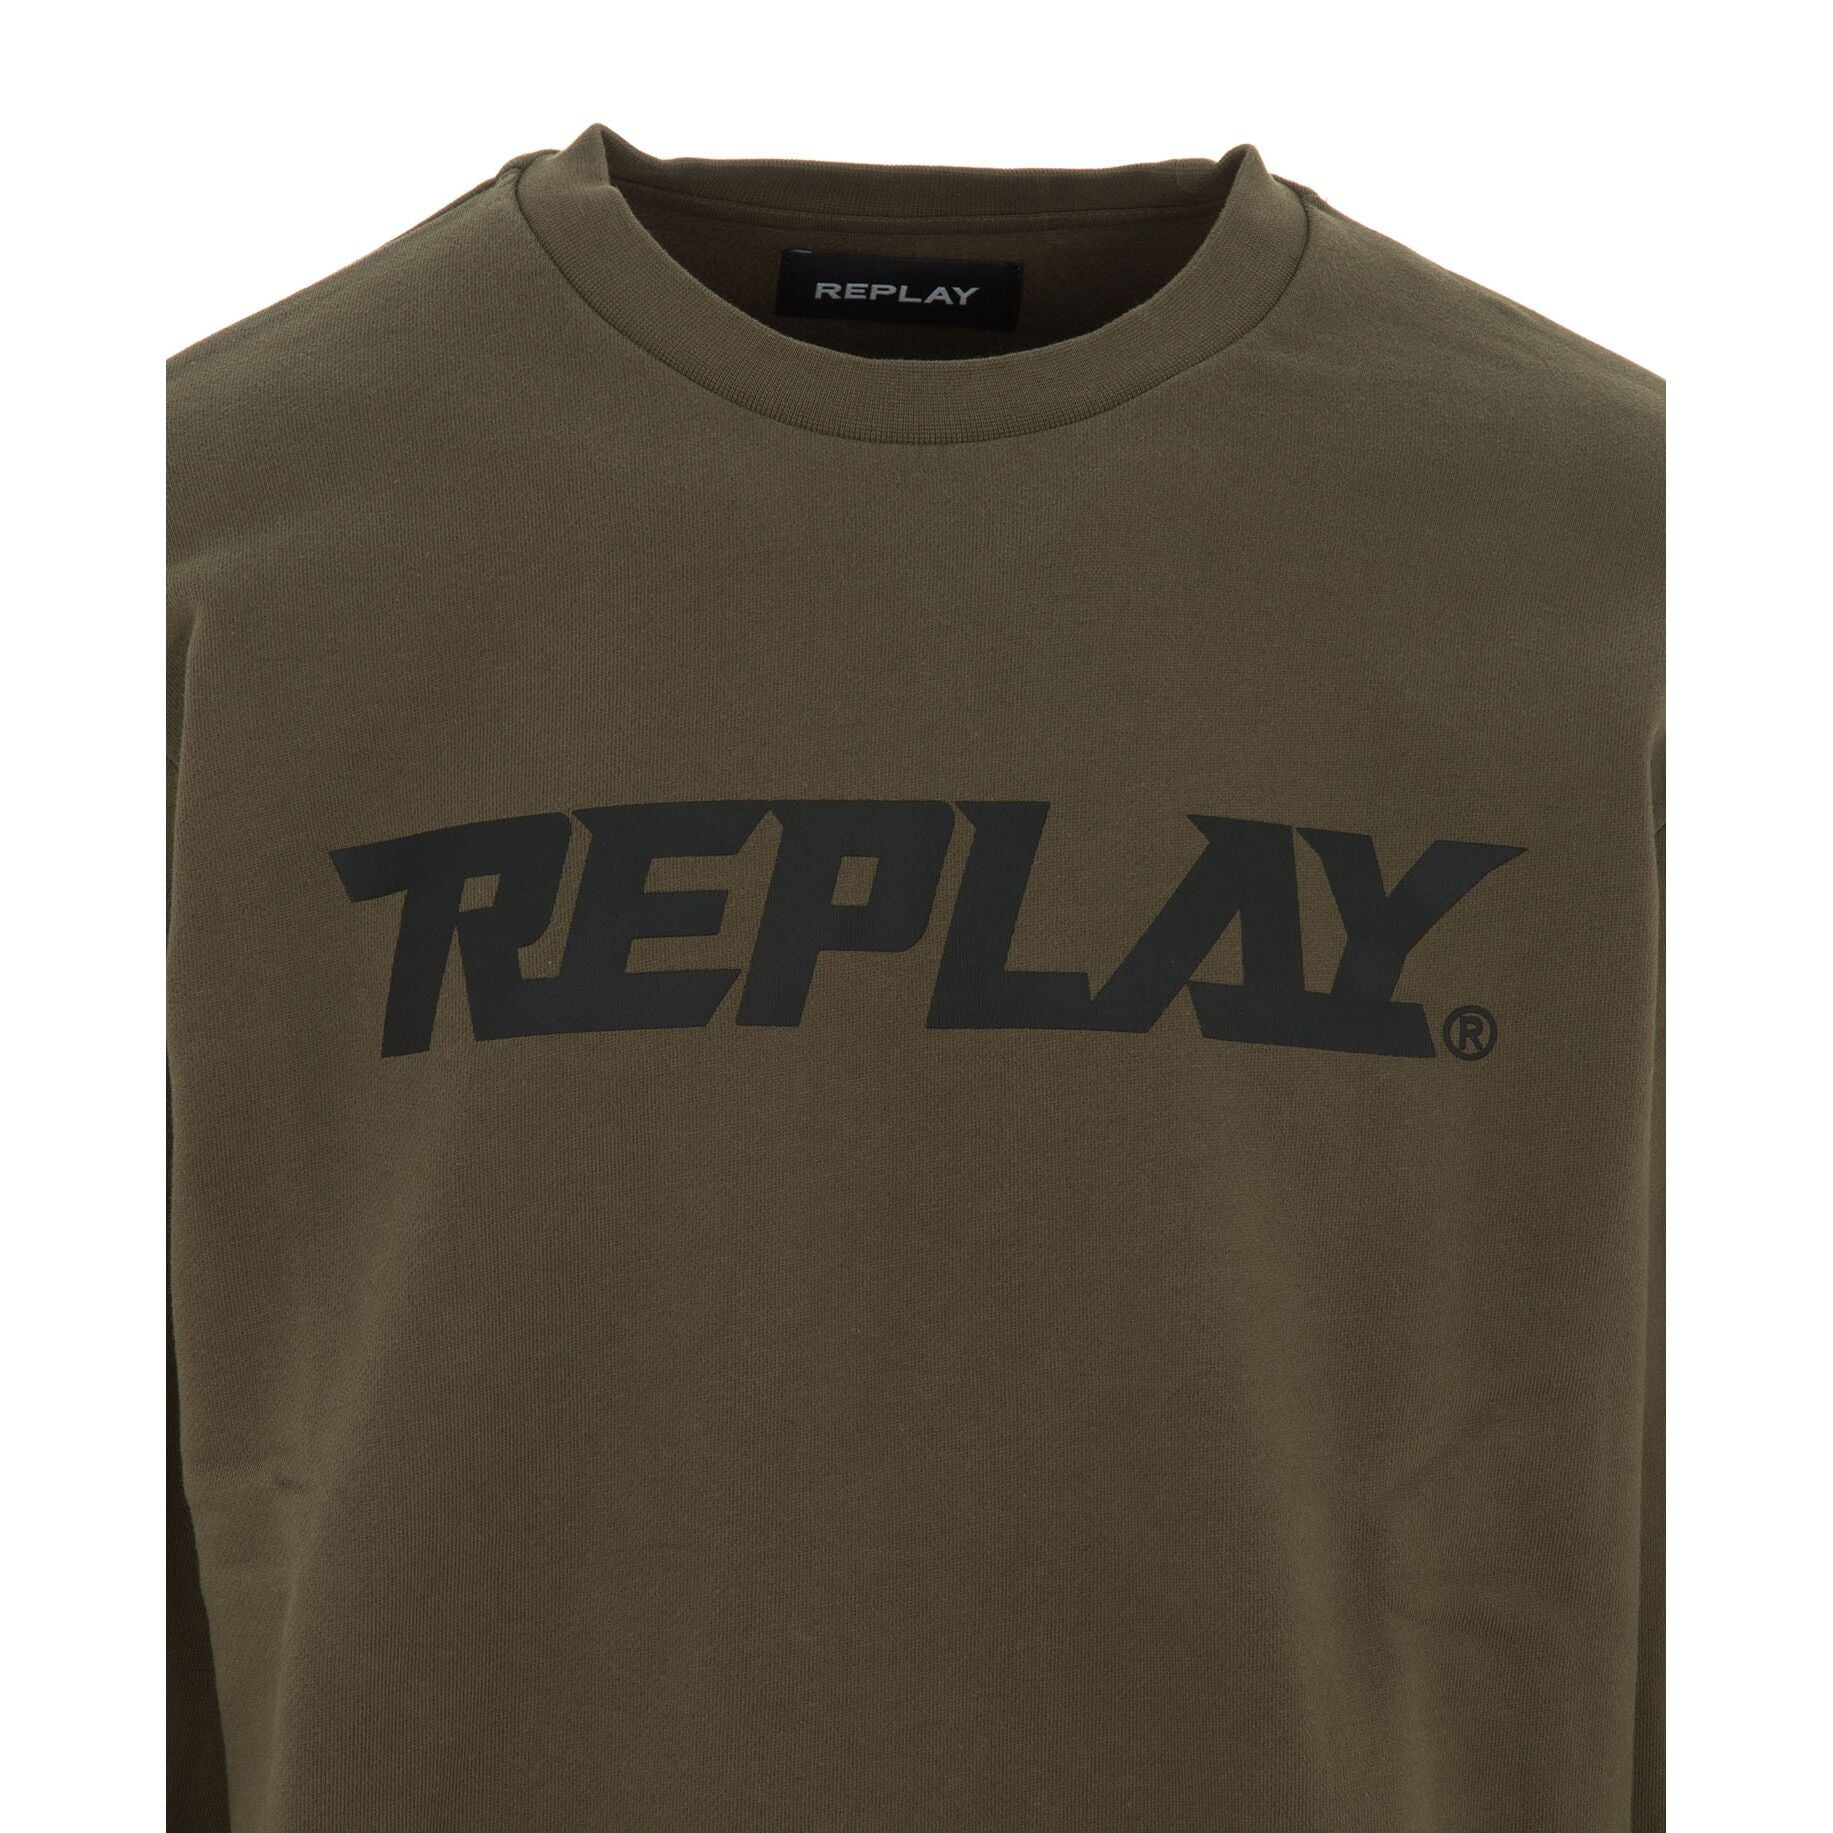 Replay M6705 21842 Sweat Top 928 Olive